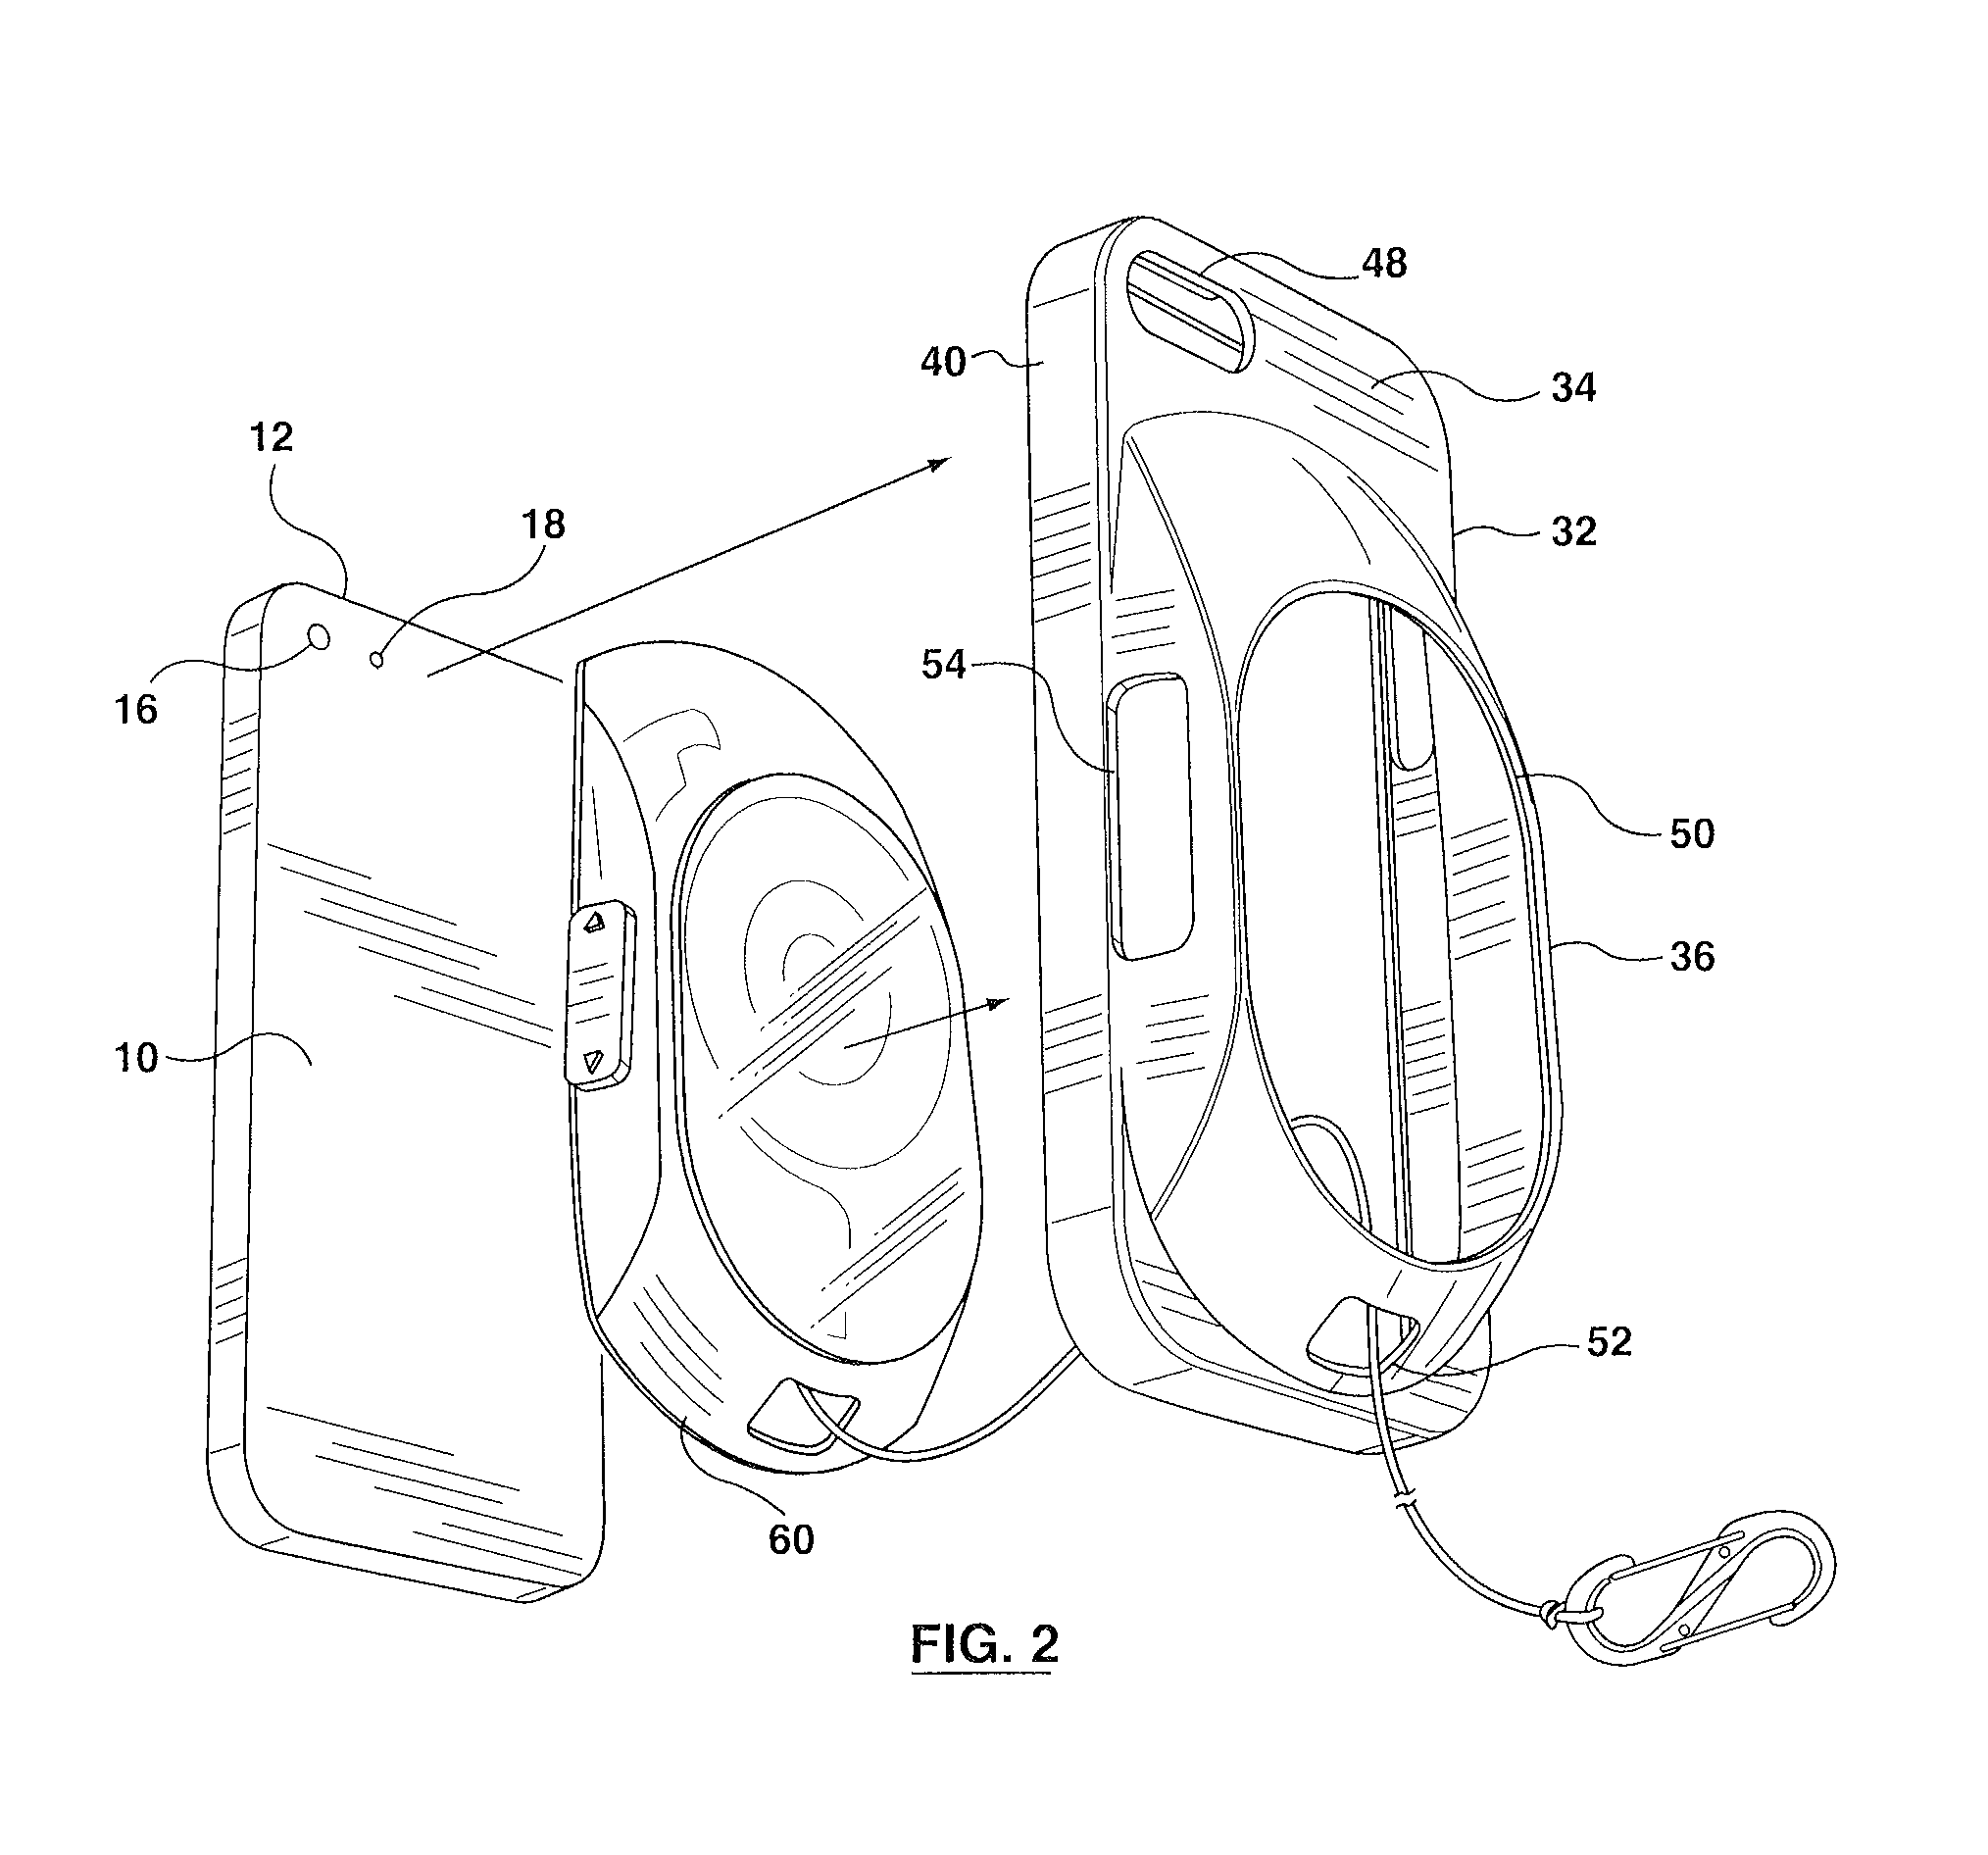 Lockable attachment device for a mobile phone or other hand held device